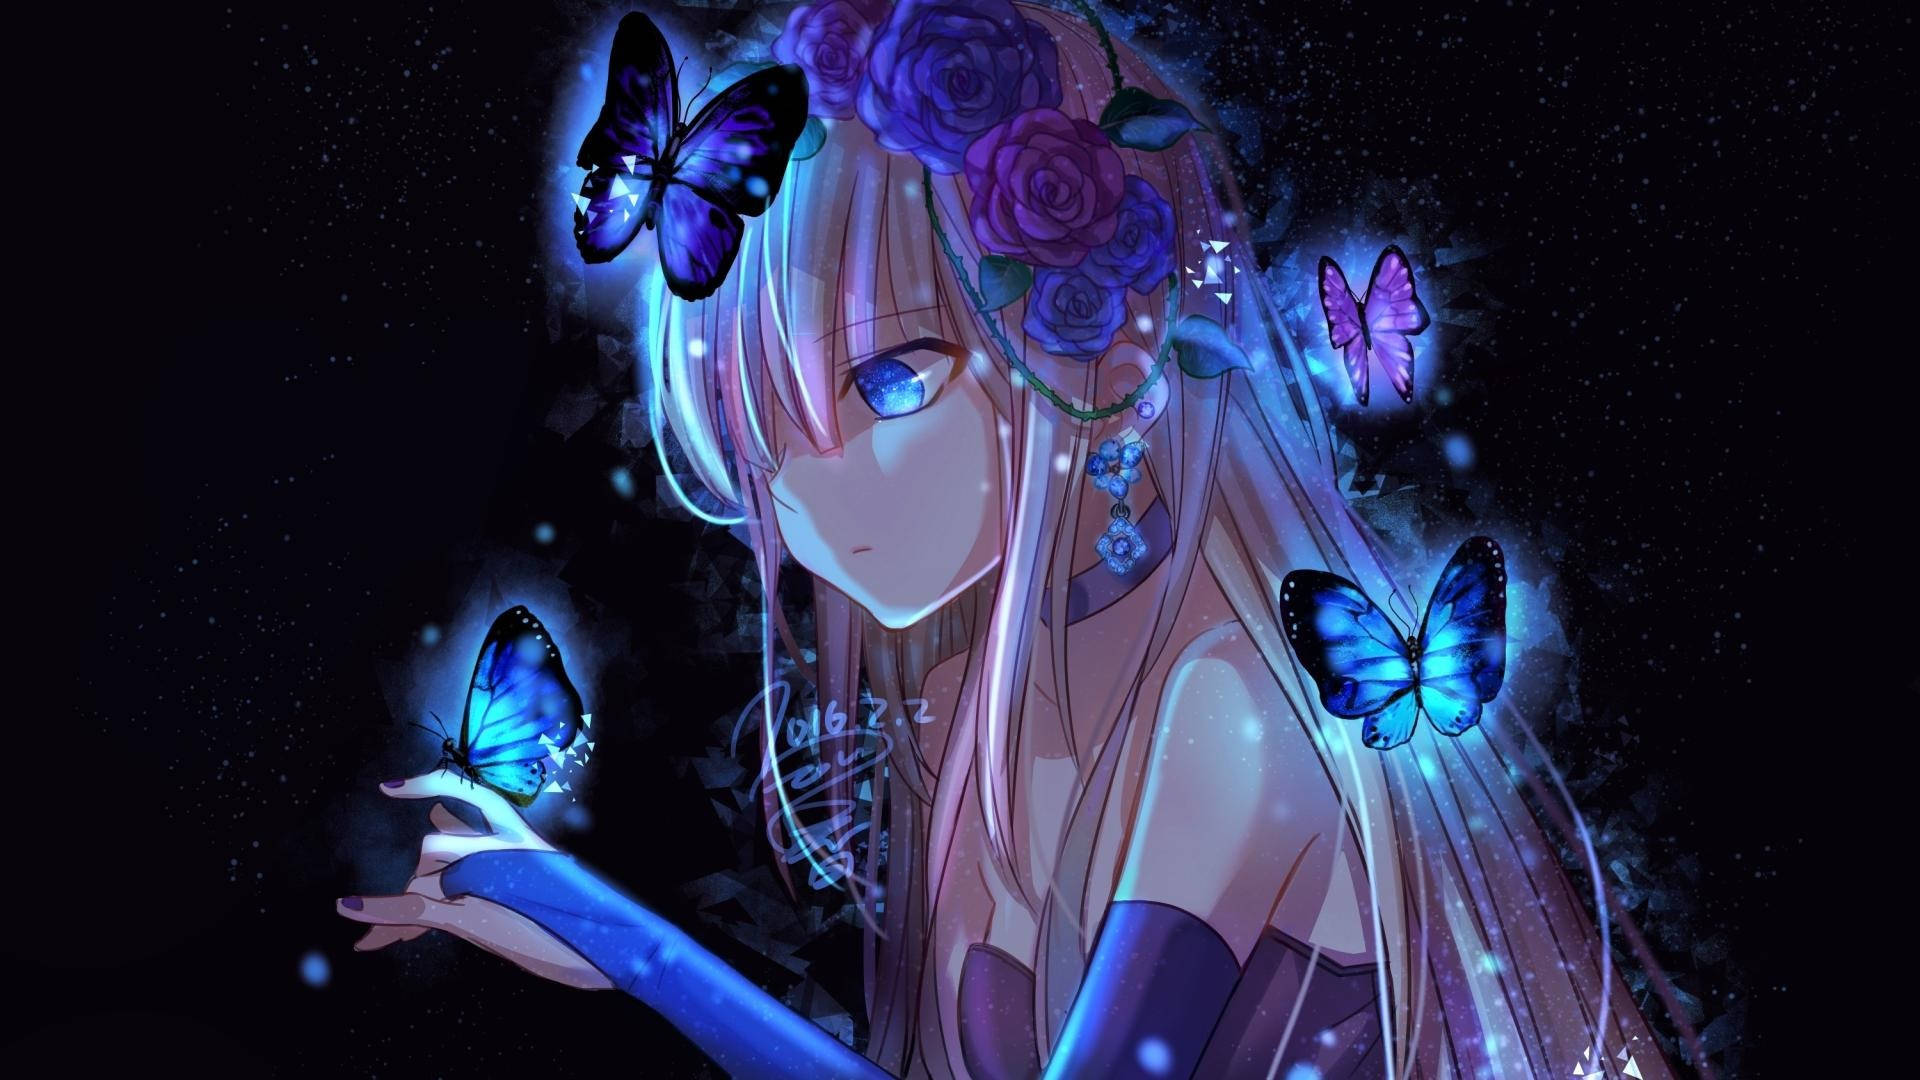 Cool Anime Girl With Butterflies Background